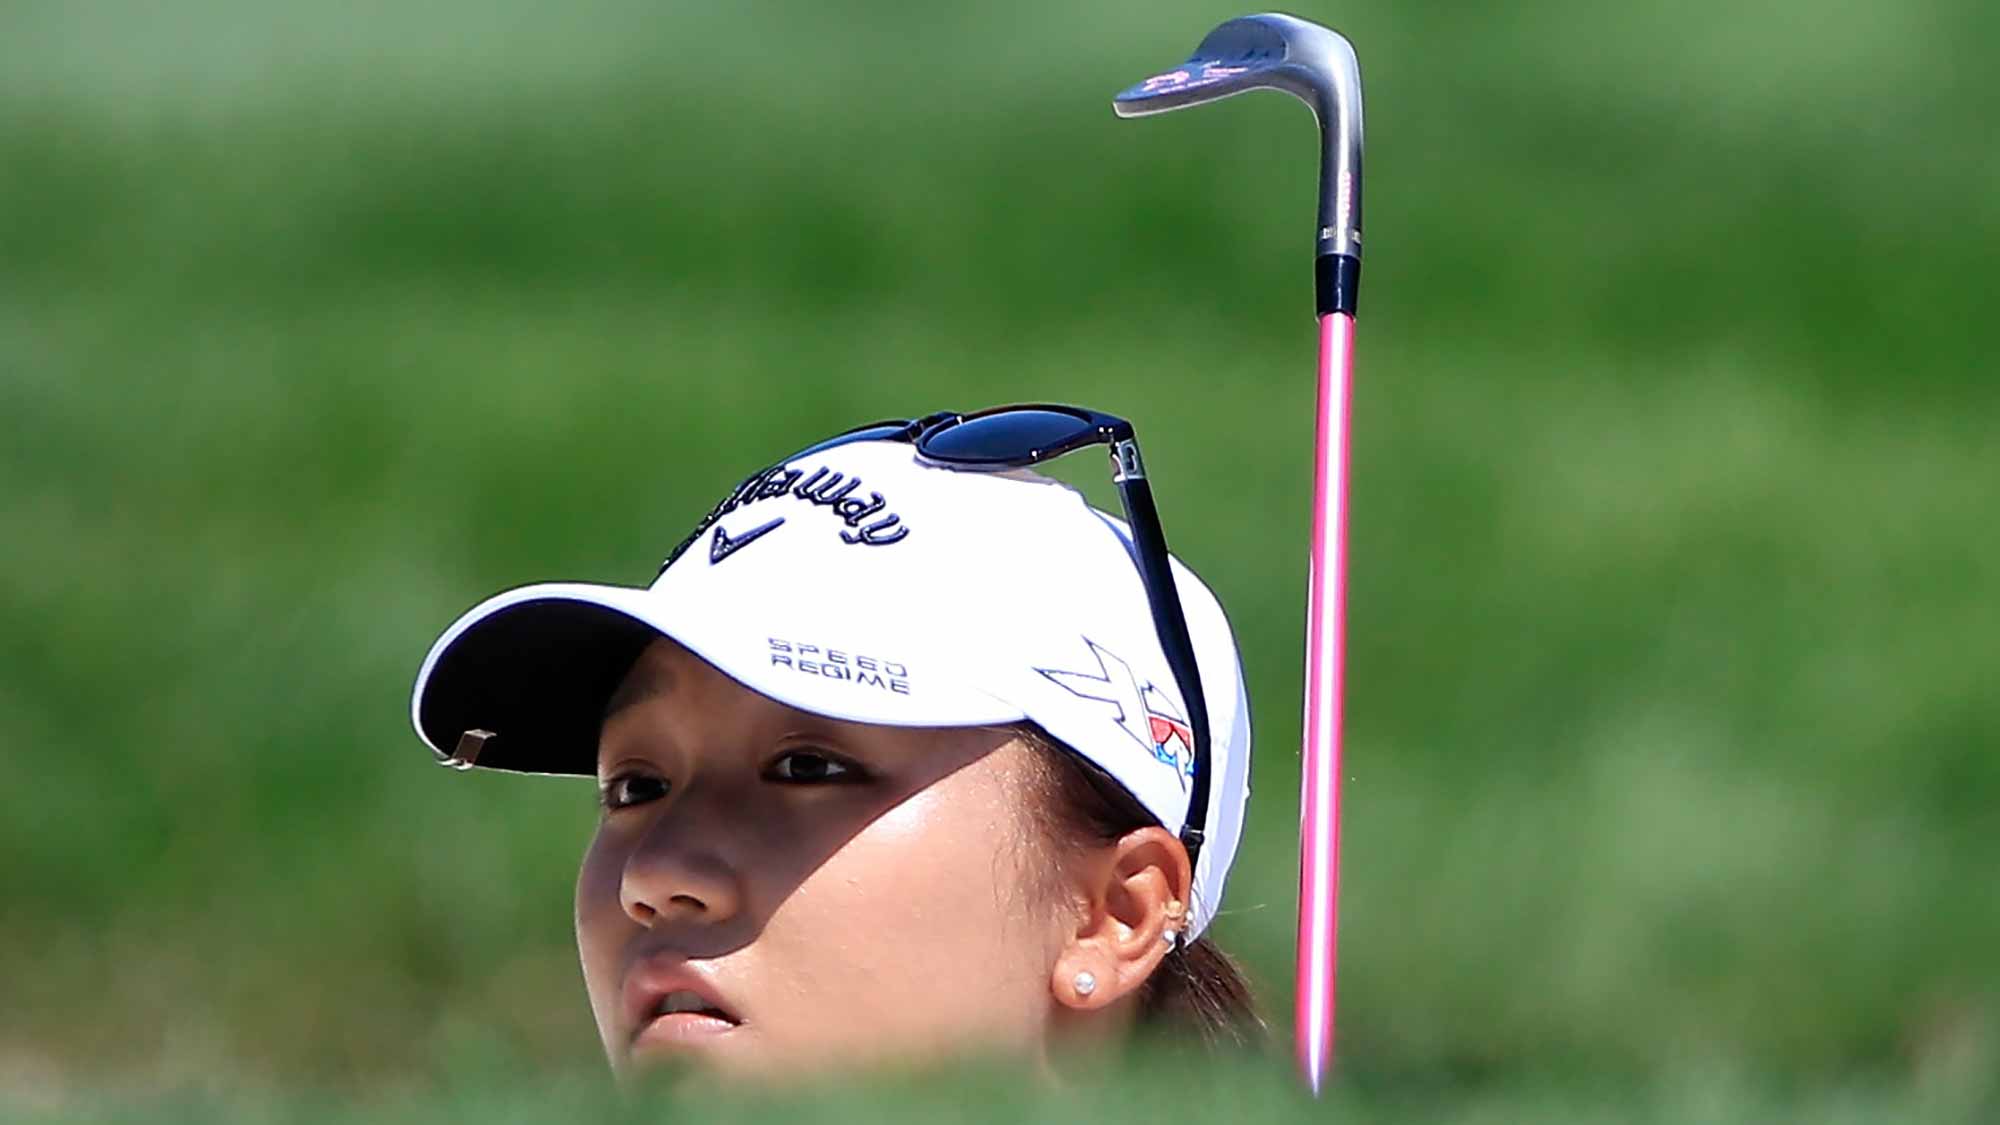 Lydia Ko of New Zealand plays a shot on the third hole during the third round of the U.S. Women's Open at Lancaster Country Club